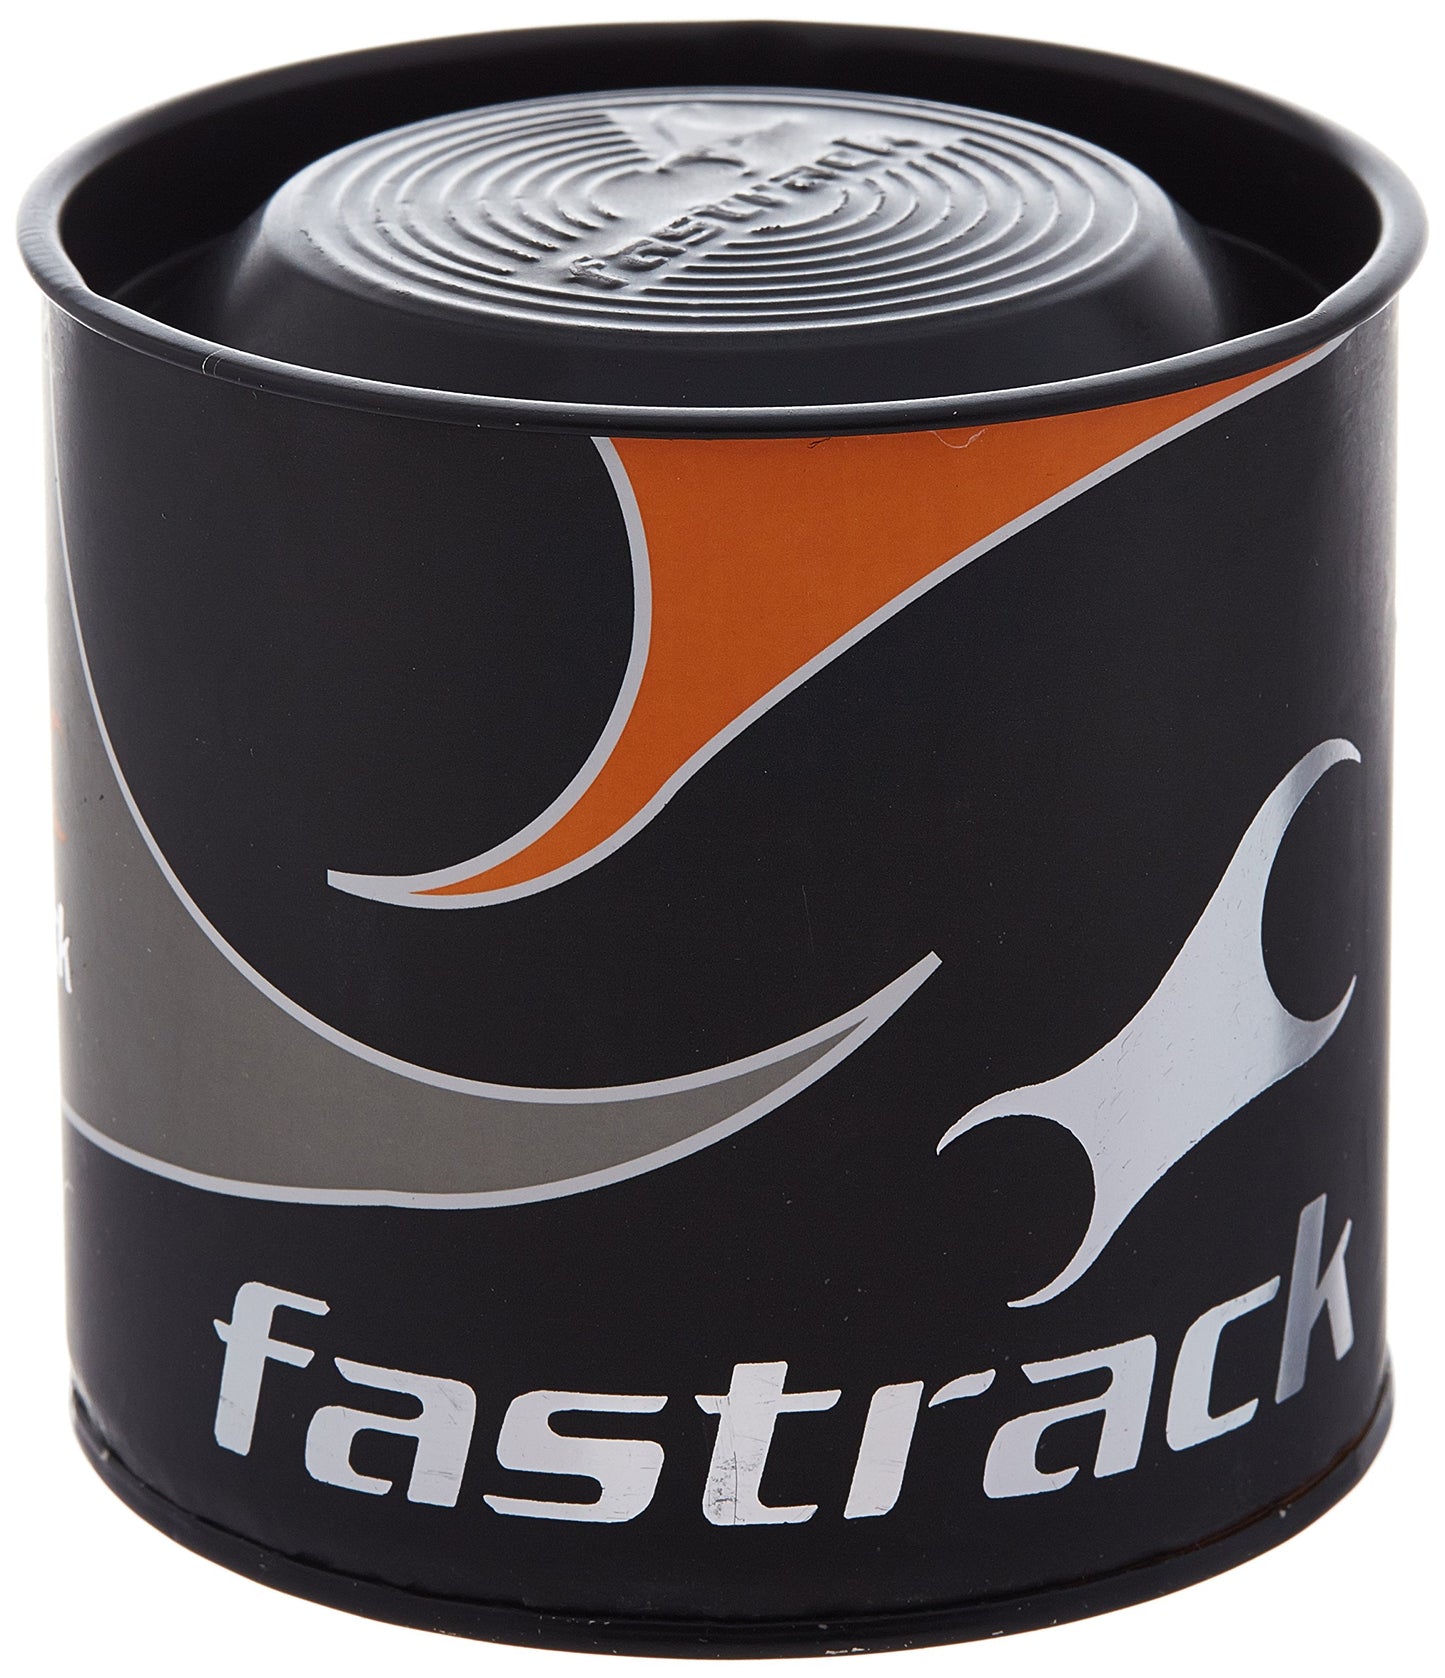 Fastrack Boy Silicone Tees Analog Orange Dial Watch -38018Pp02W / 38018Pp02W, Band Color-Orange